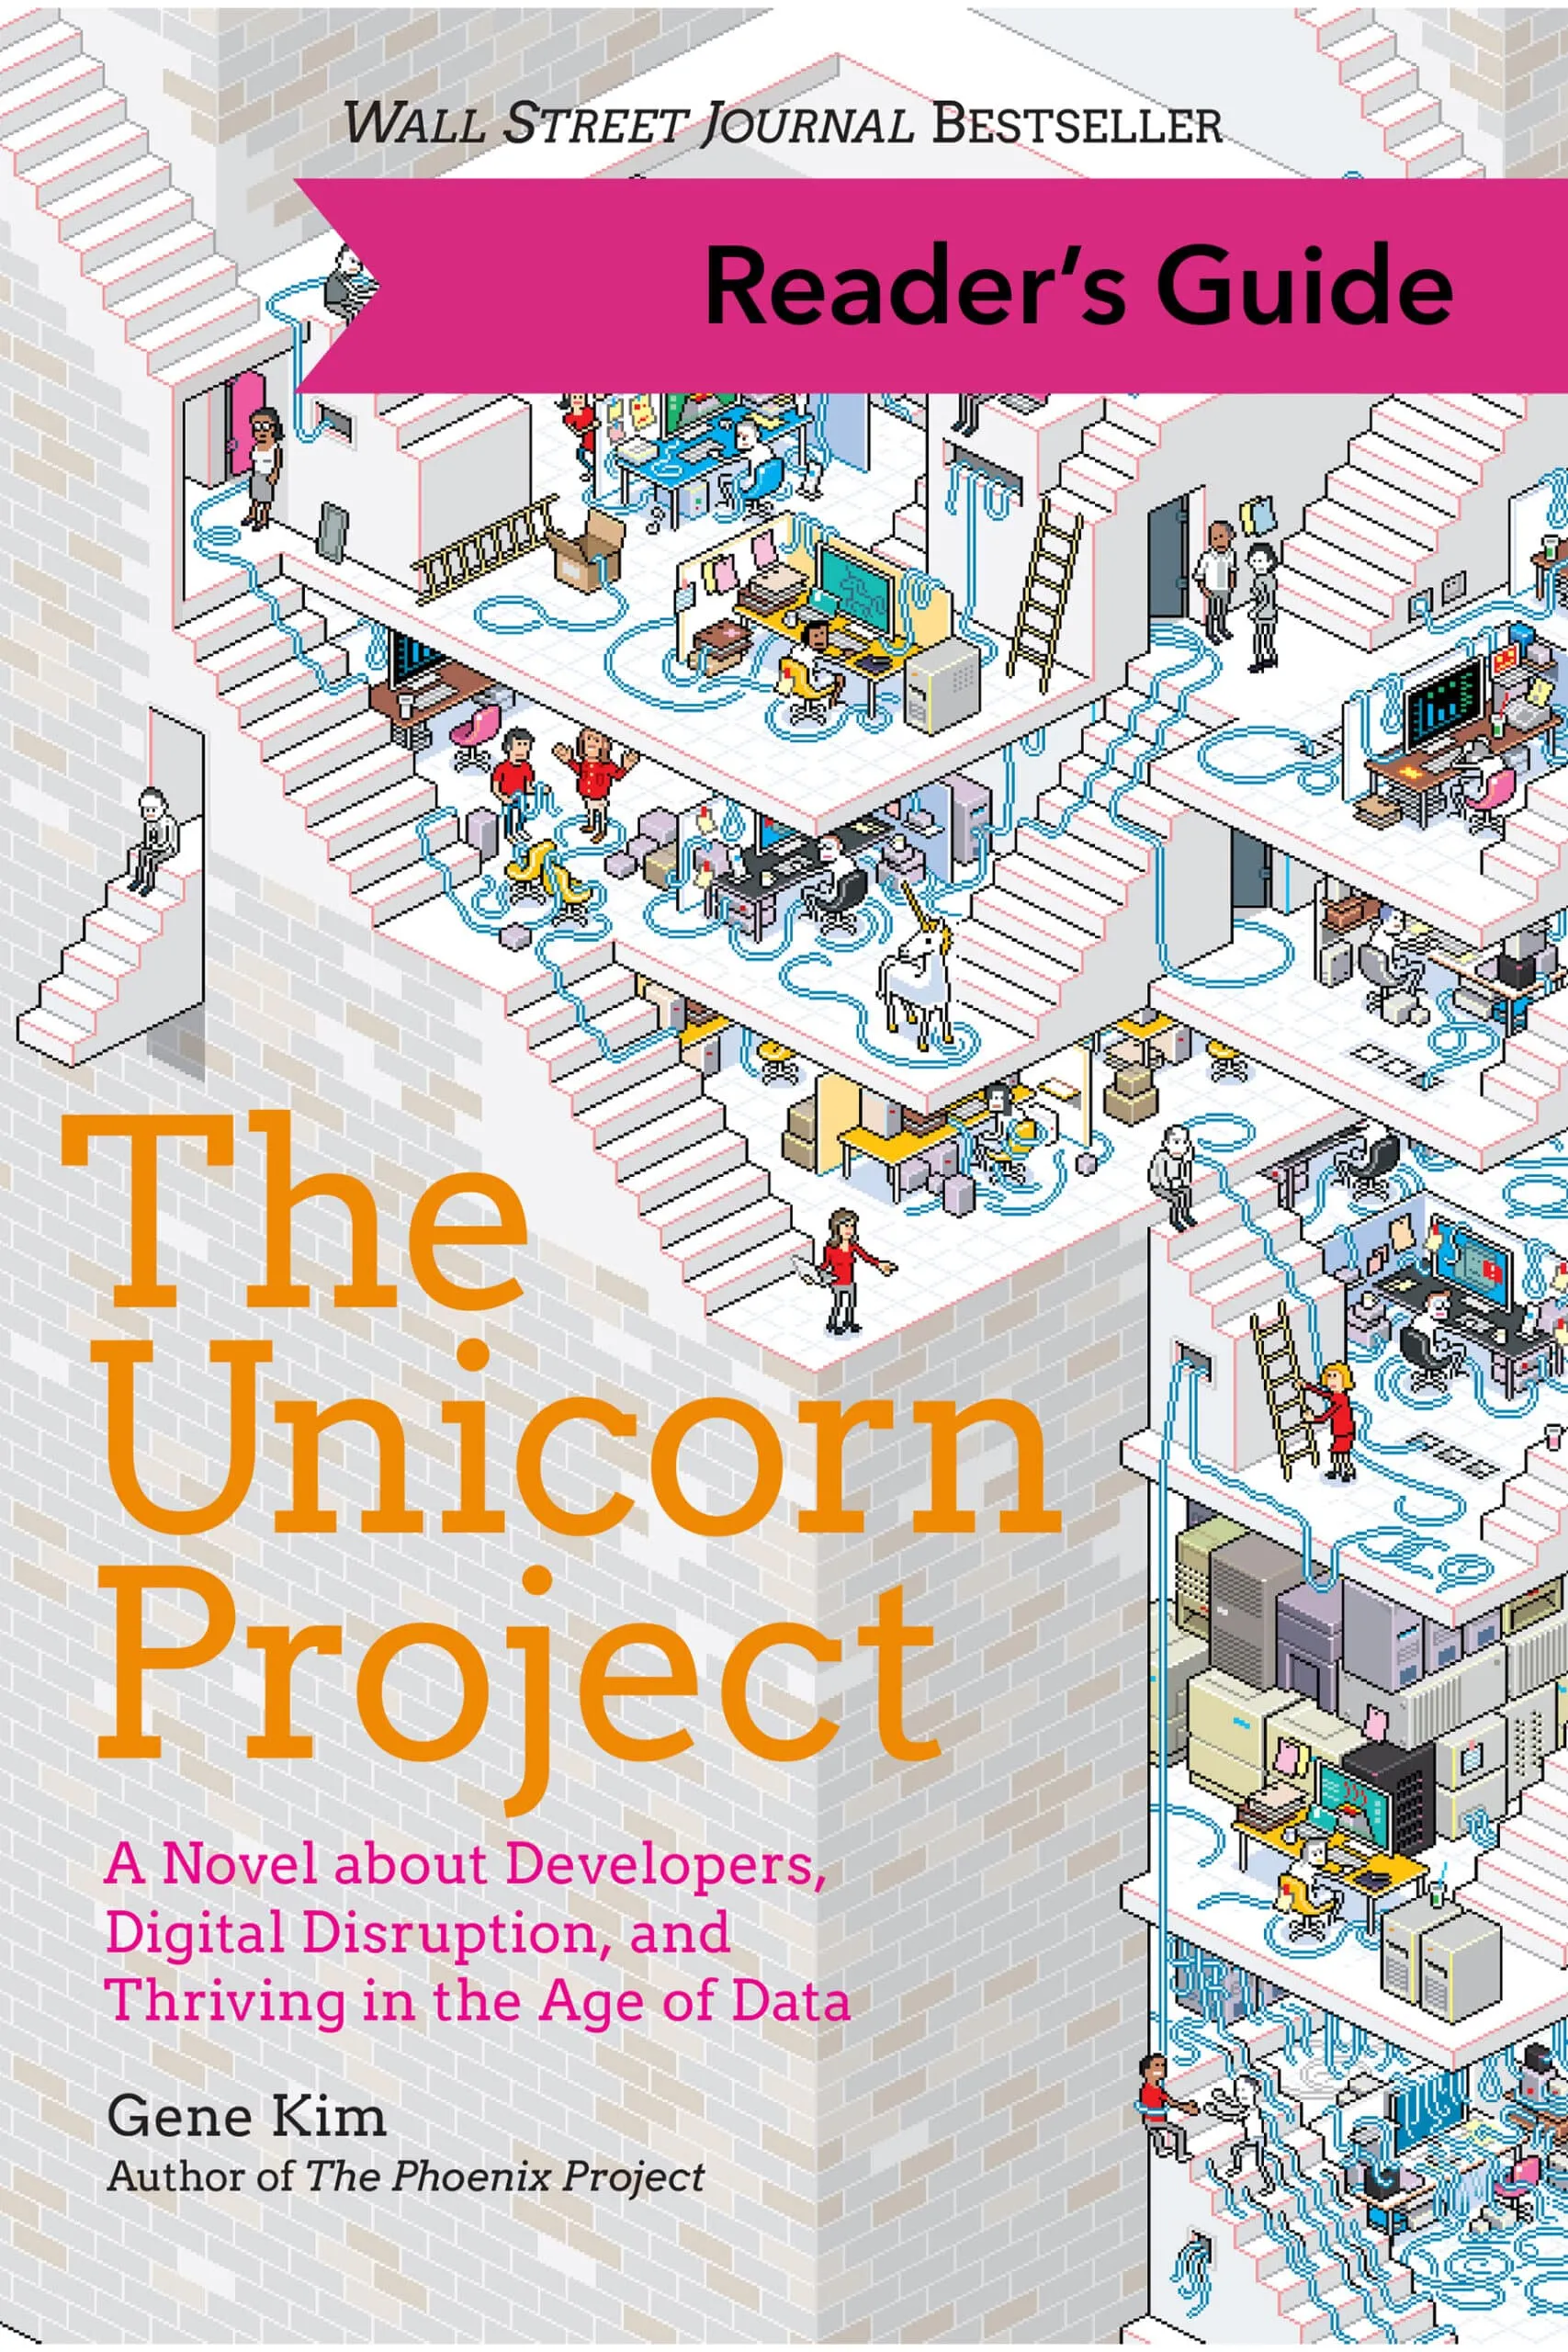 Cover of the book title The Unicorn Project